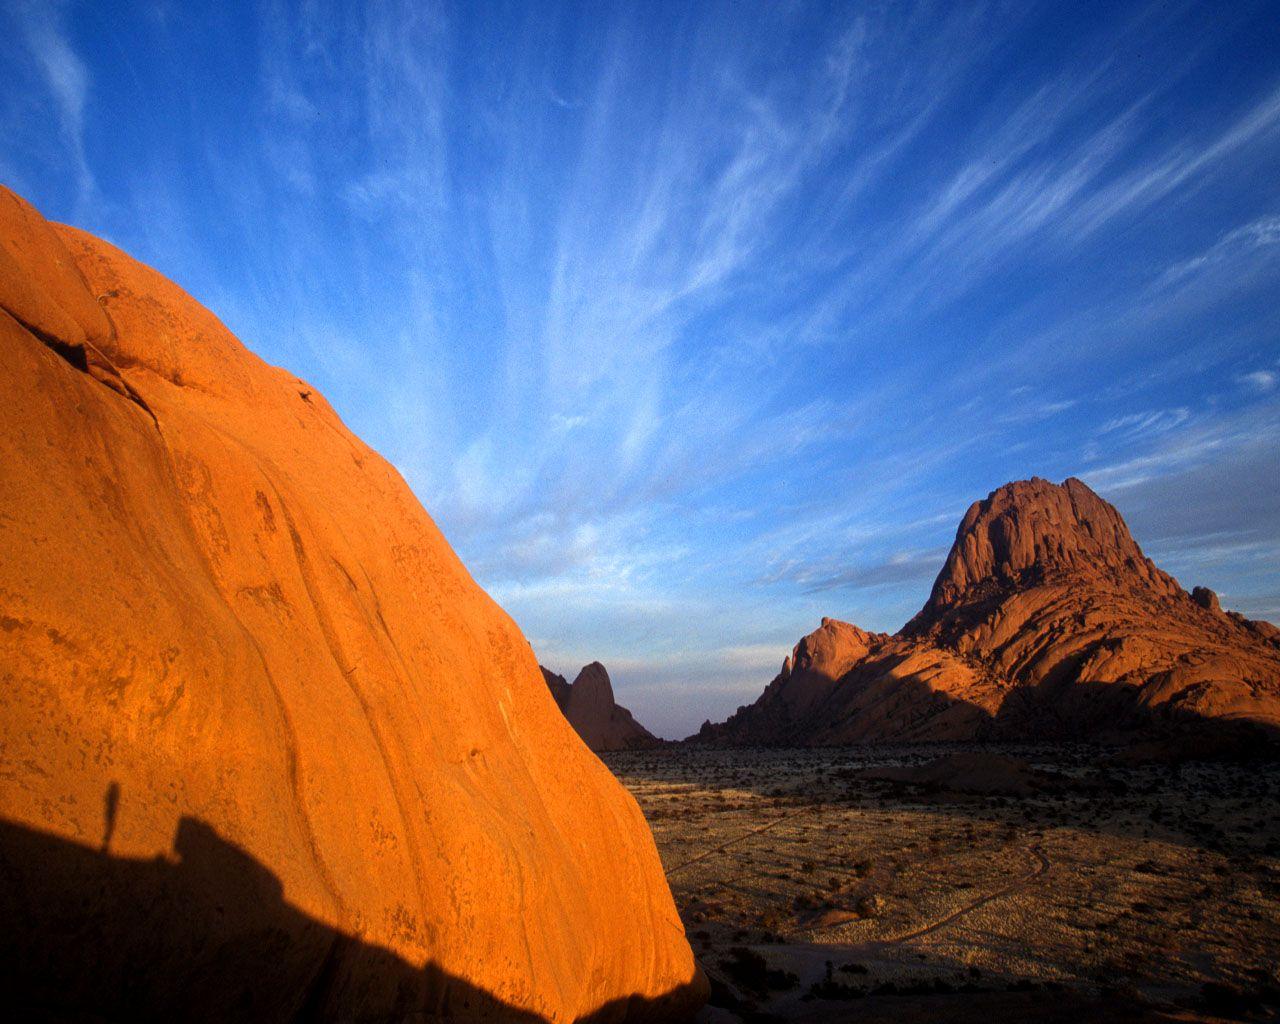 It is not without reason that Greater Spitzkoppe is dubbed